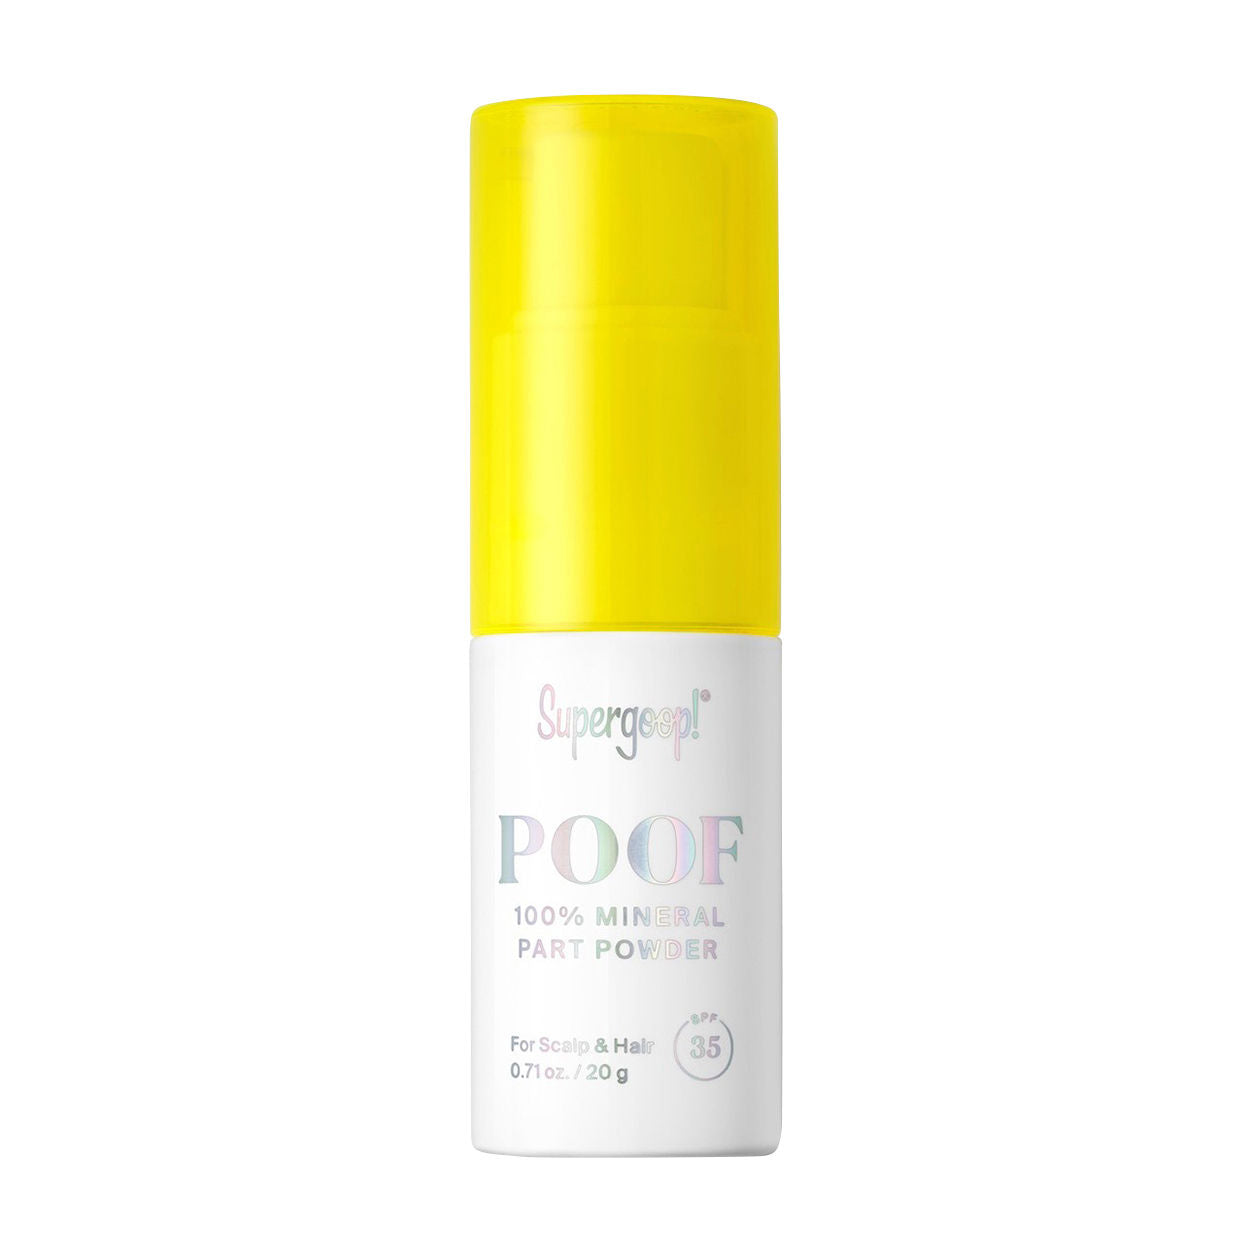 Supergoop! Poof 100% Mineral Part Powder SPF 35 main image